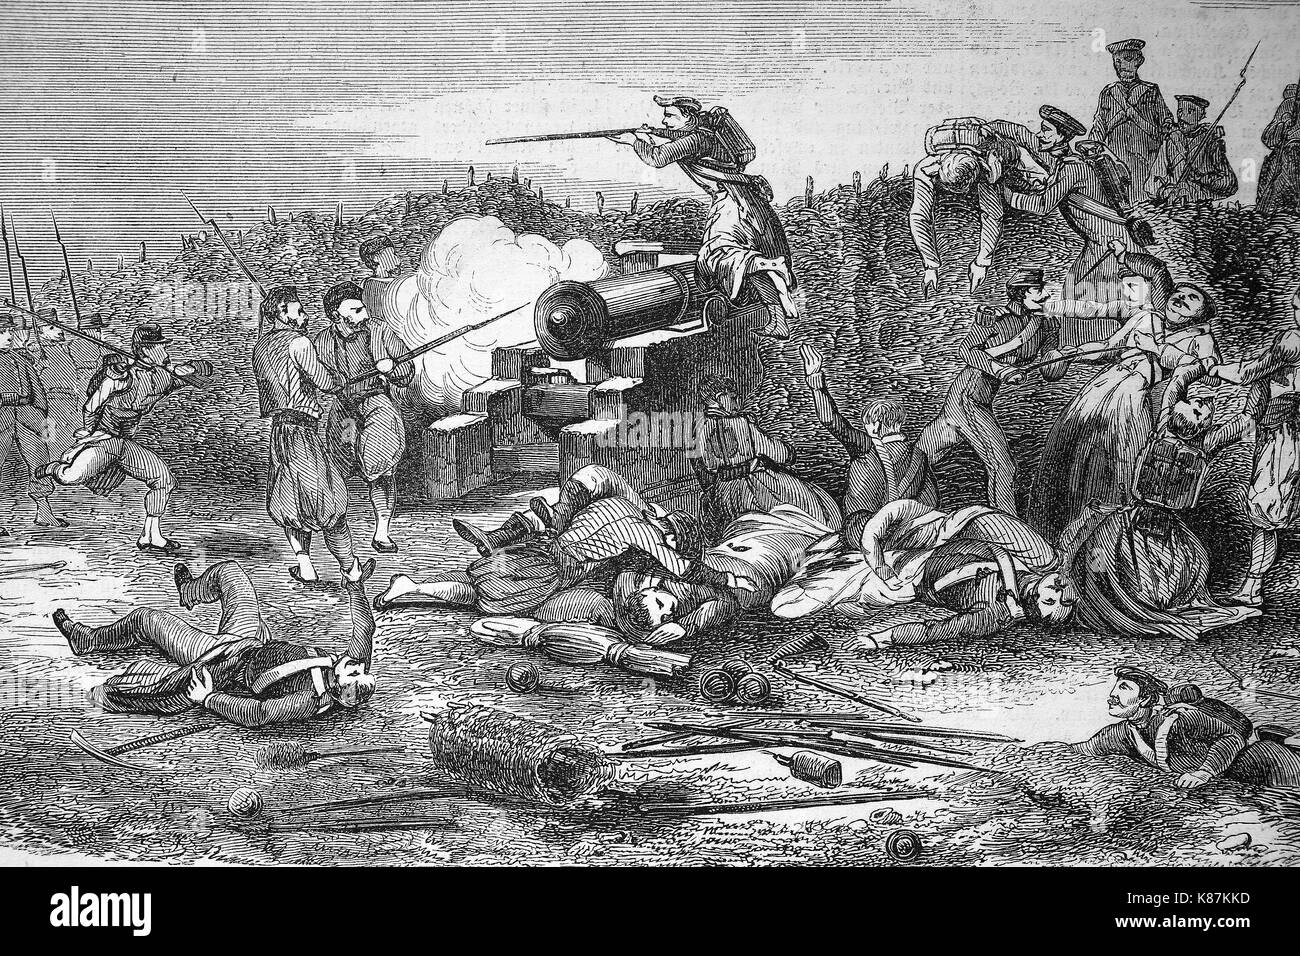 Crimean War 1855, the Russian army attacks a French battery, Digital improved reproduction of an original woodprint from the 19th century Stock Photo